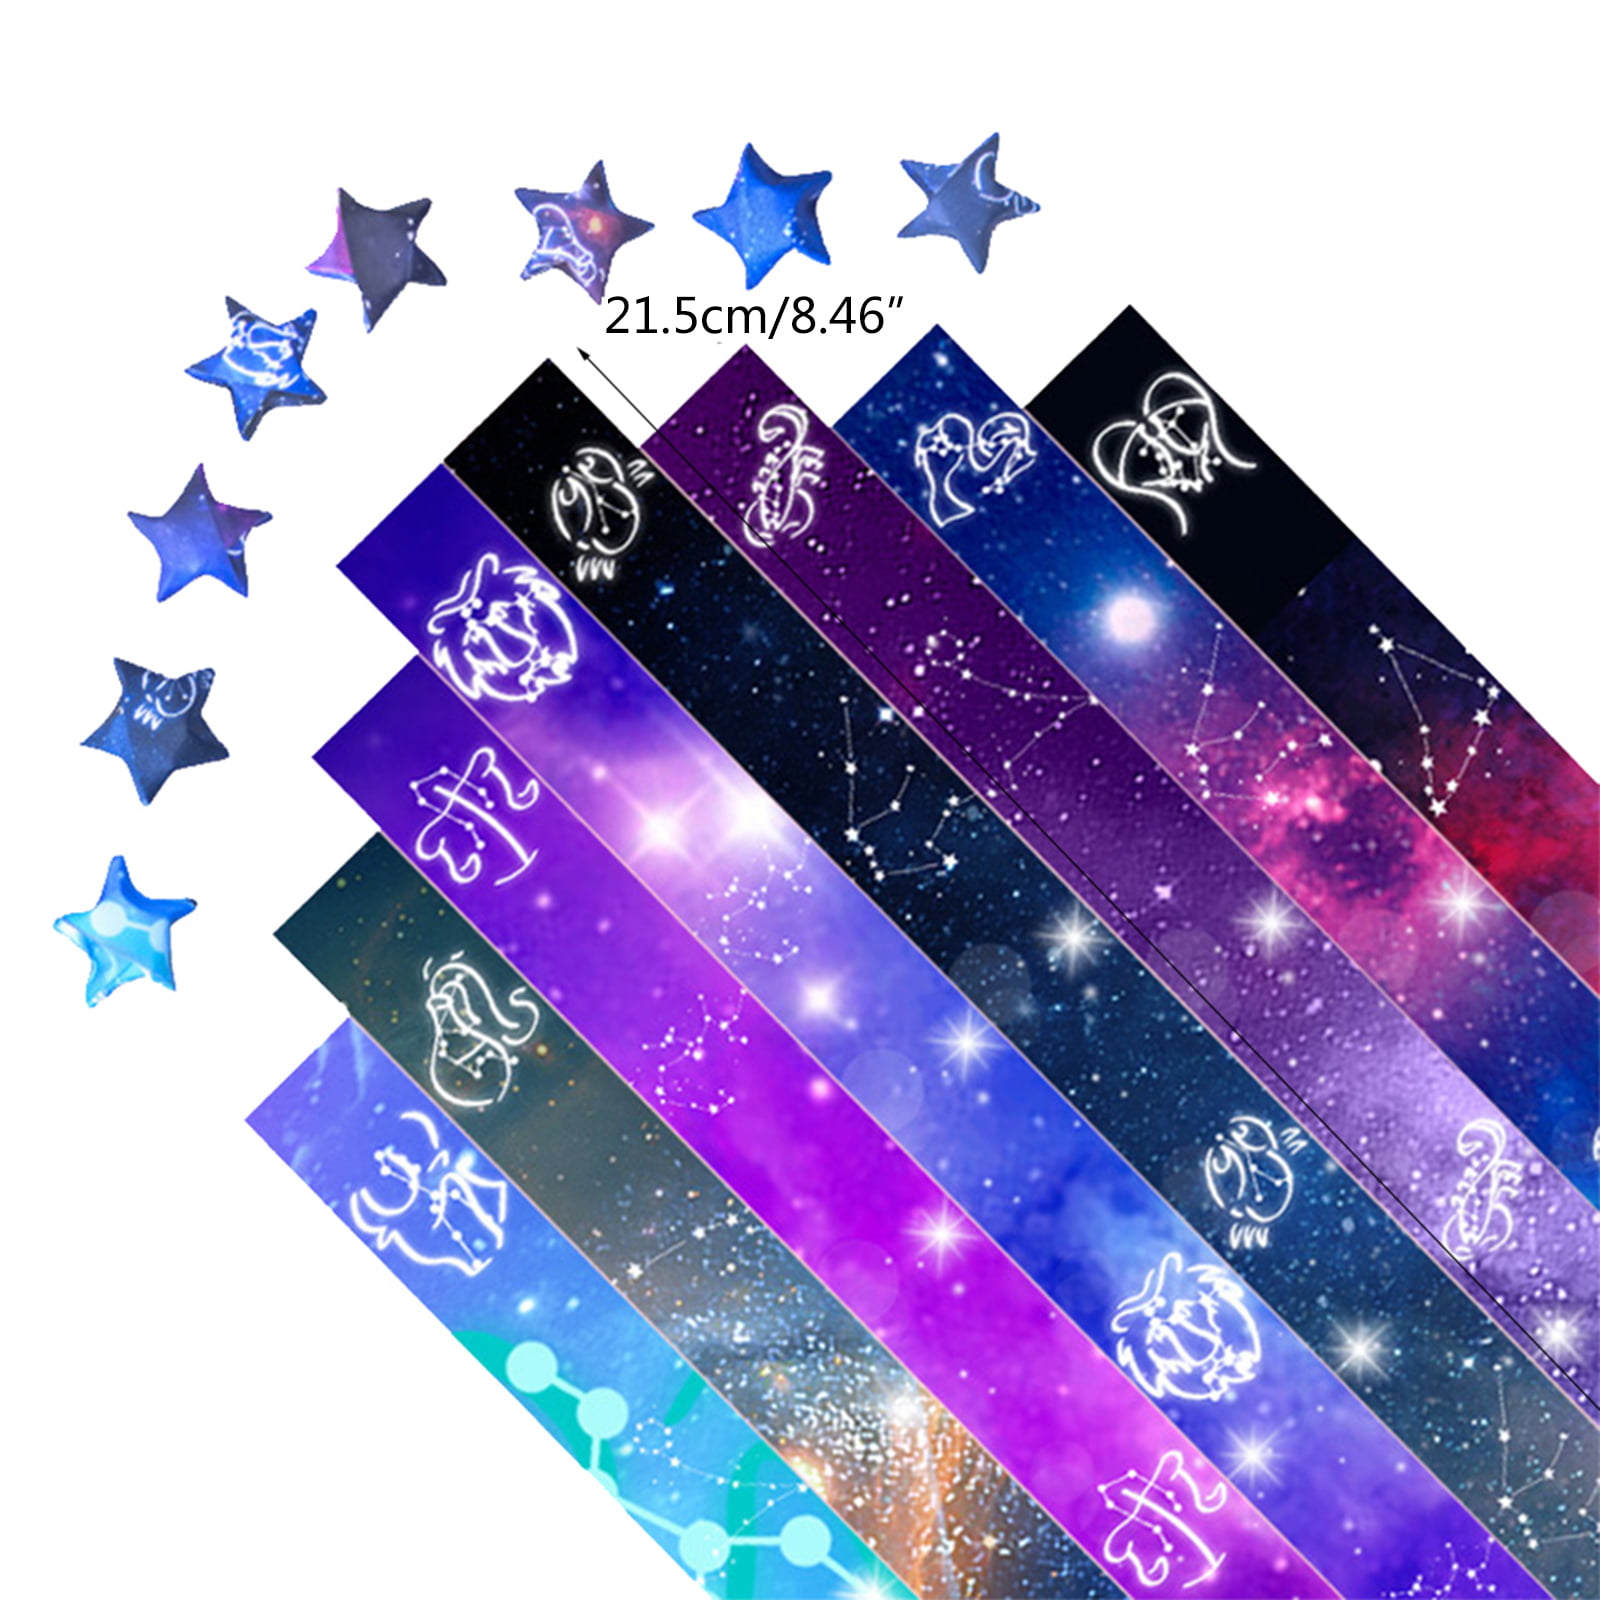 540 Sheets of Star Origami Paper, 4 Colors of Lucky Star Paper Strips,  Double Sided Origami Star Paper Strips, Lucky Star Decoration Folding Paper  for